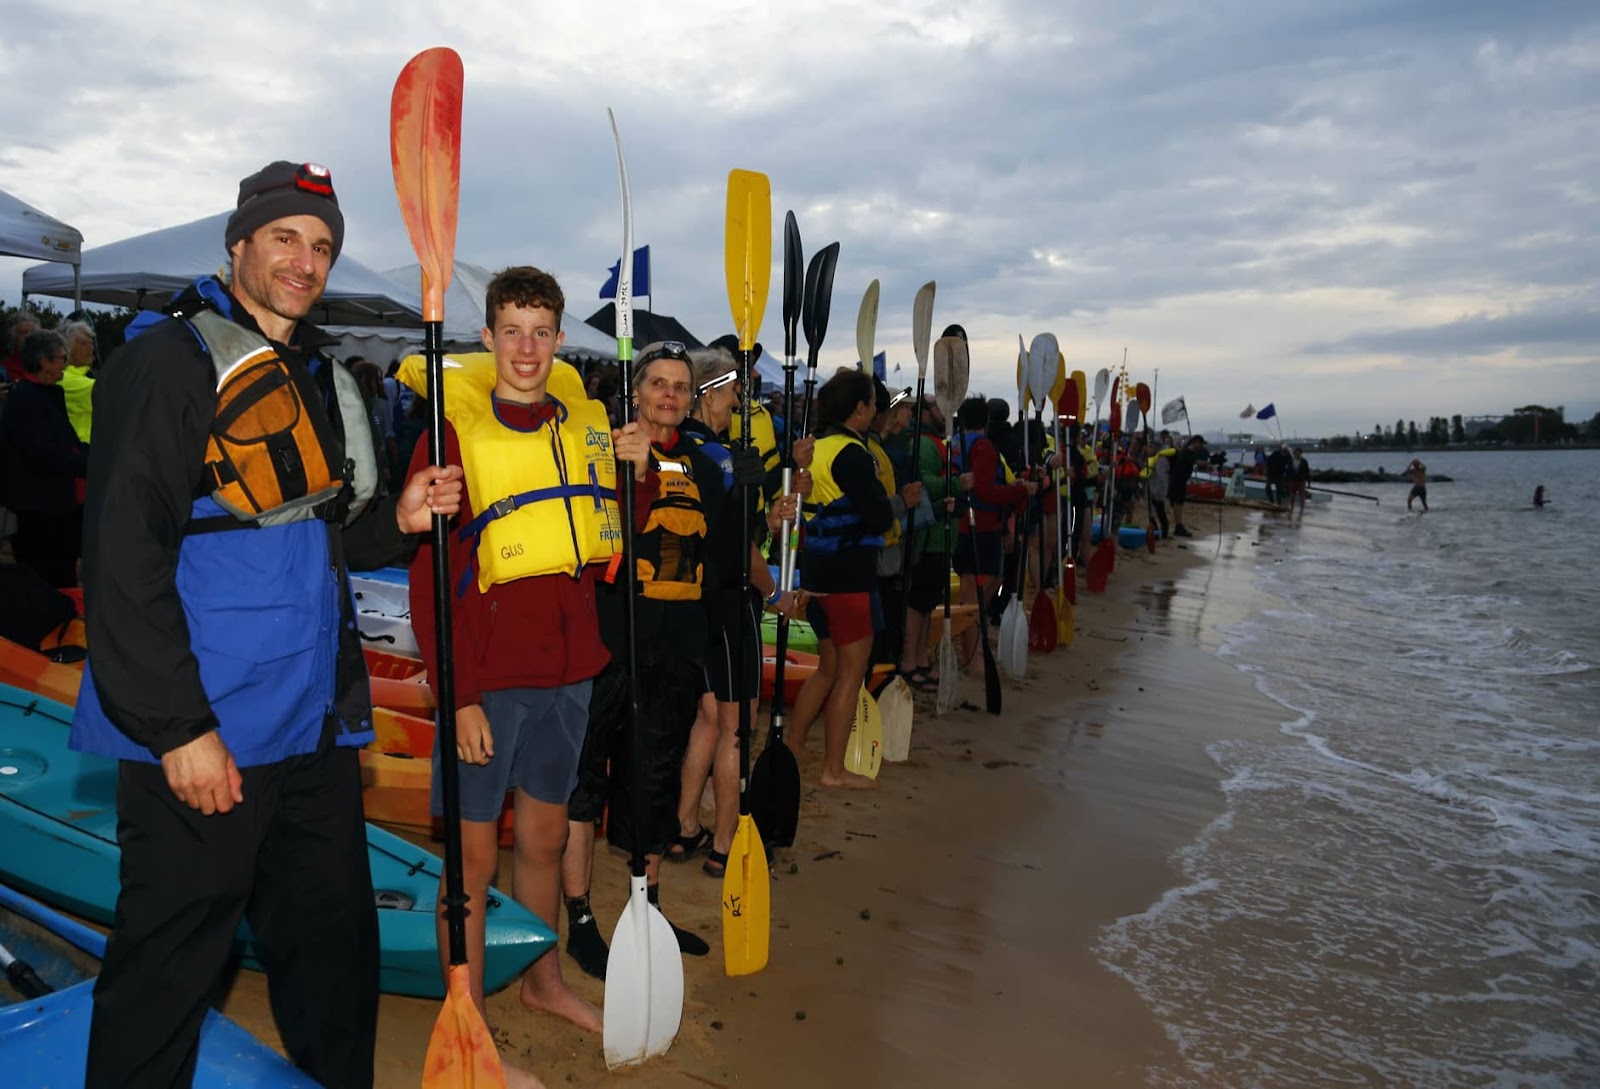 Protesters line up on the beach with their kayaks and oars for an evening blockade